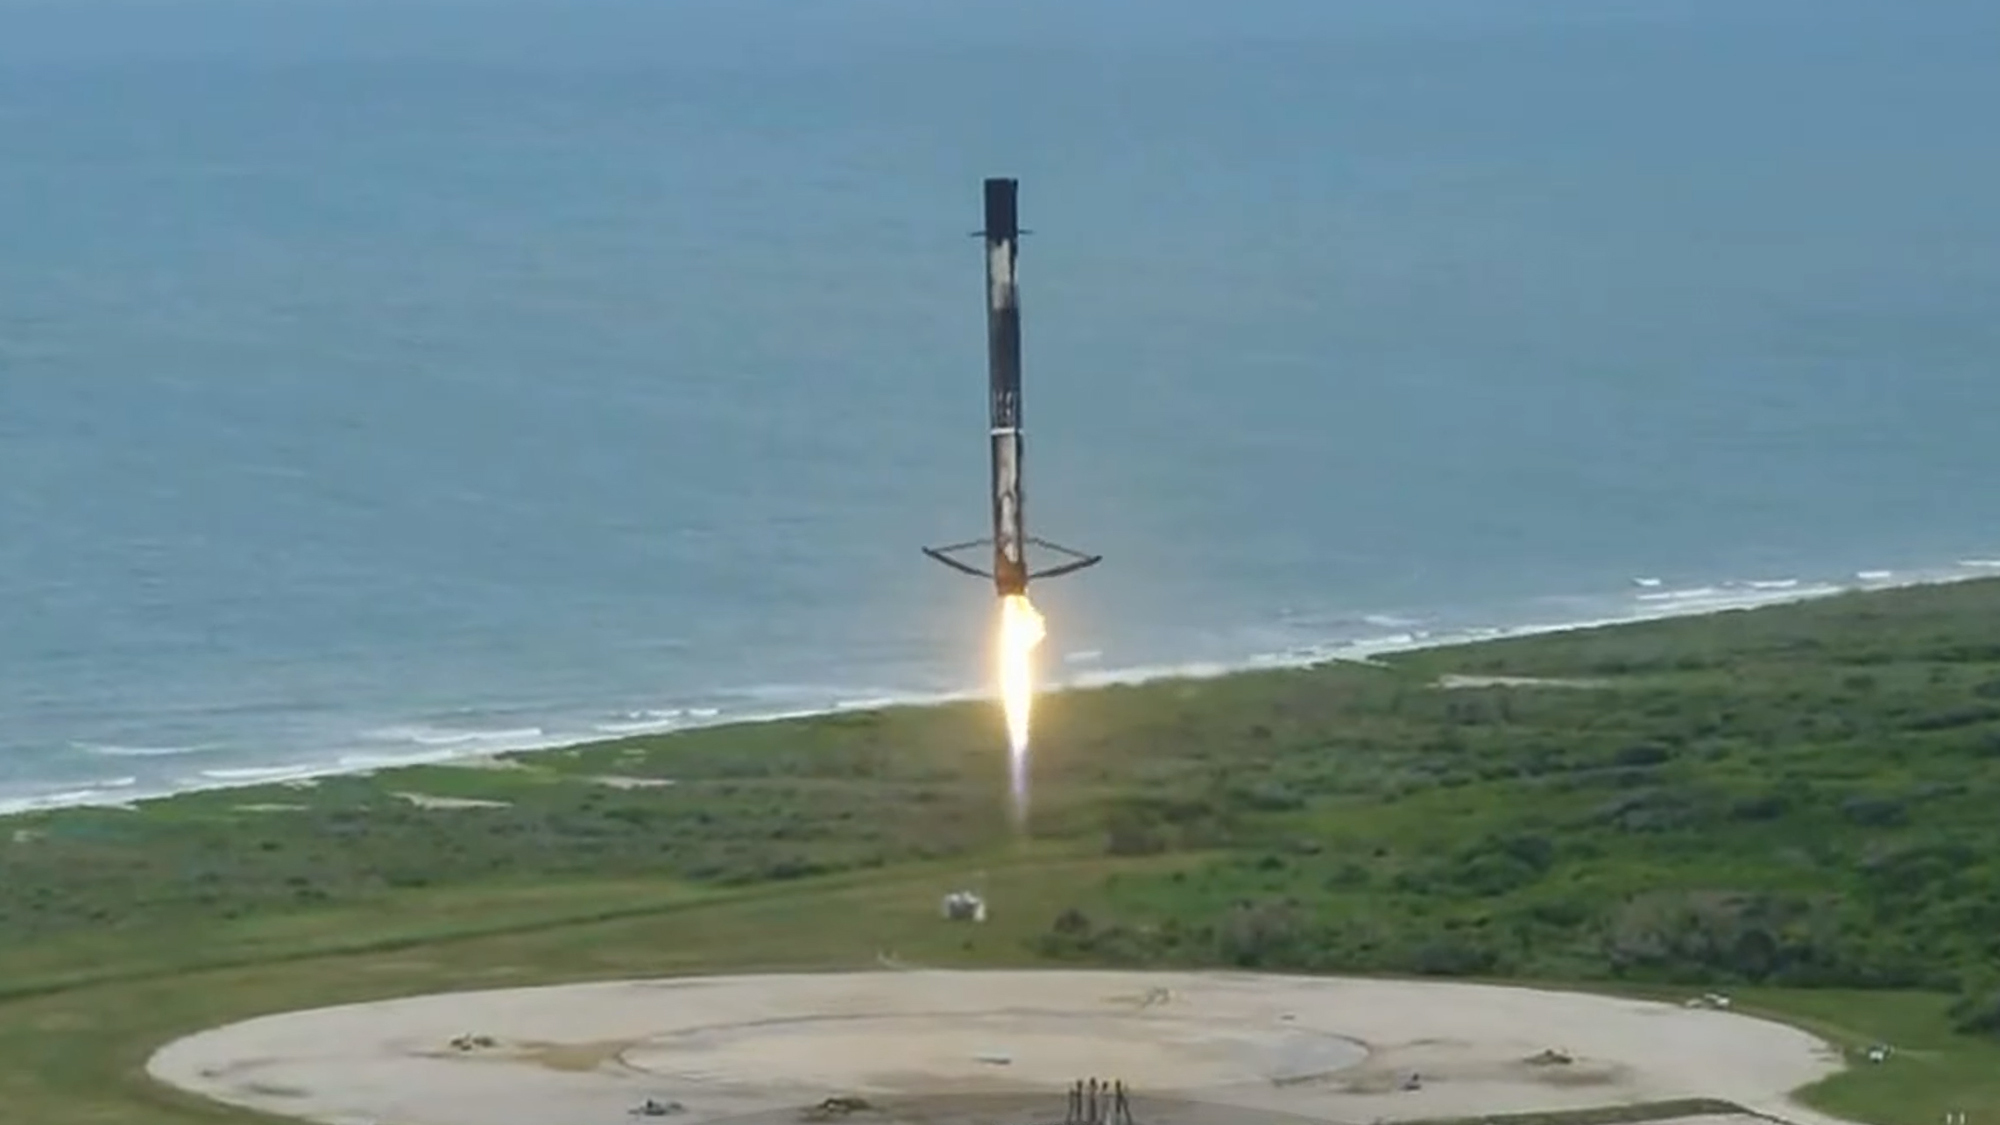 Flacon 9 first stage booster landing